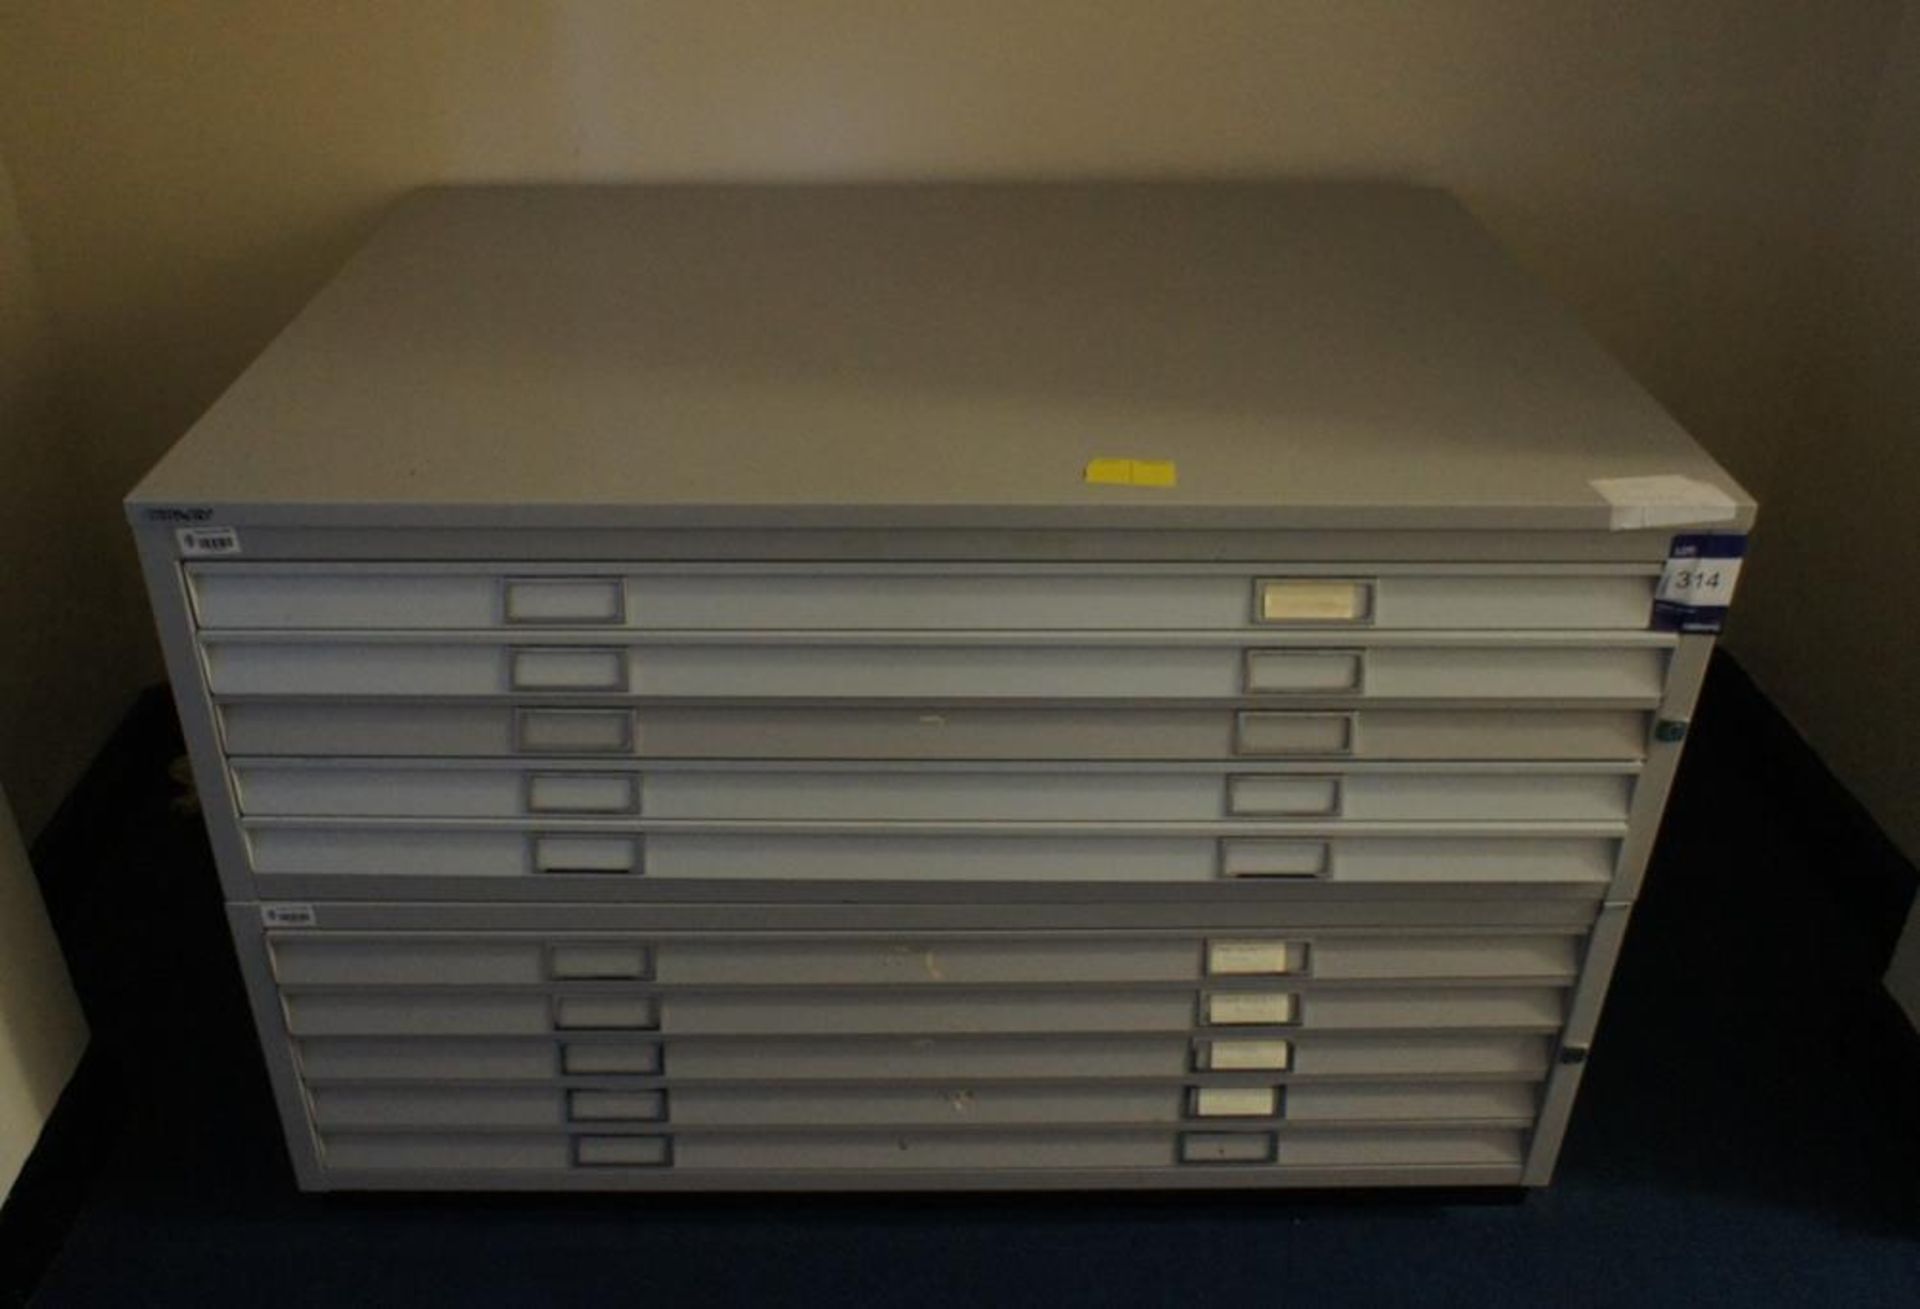 * Bisley Steel 10 Drawer Plan Chest Photographs are provided for example purposes only and do not